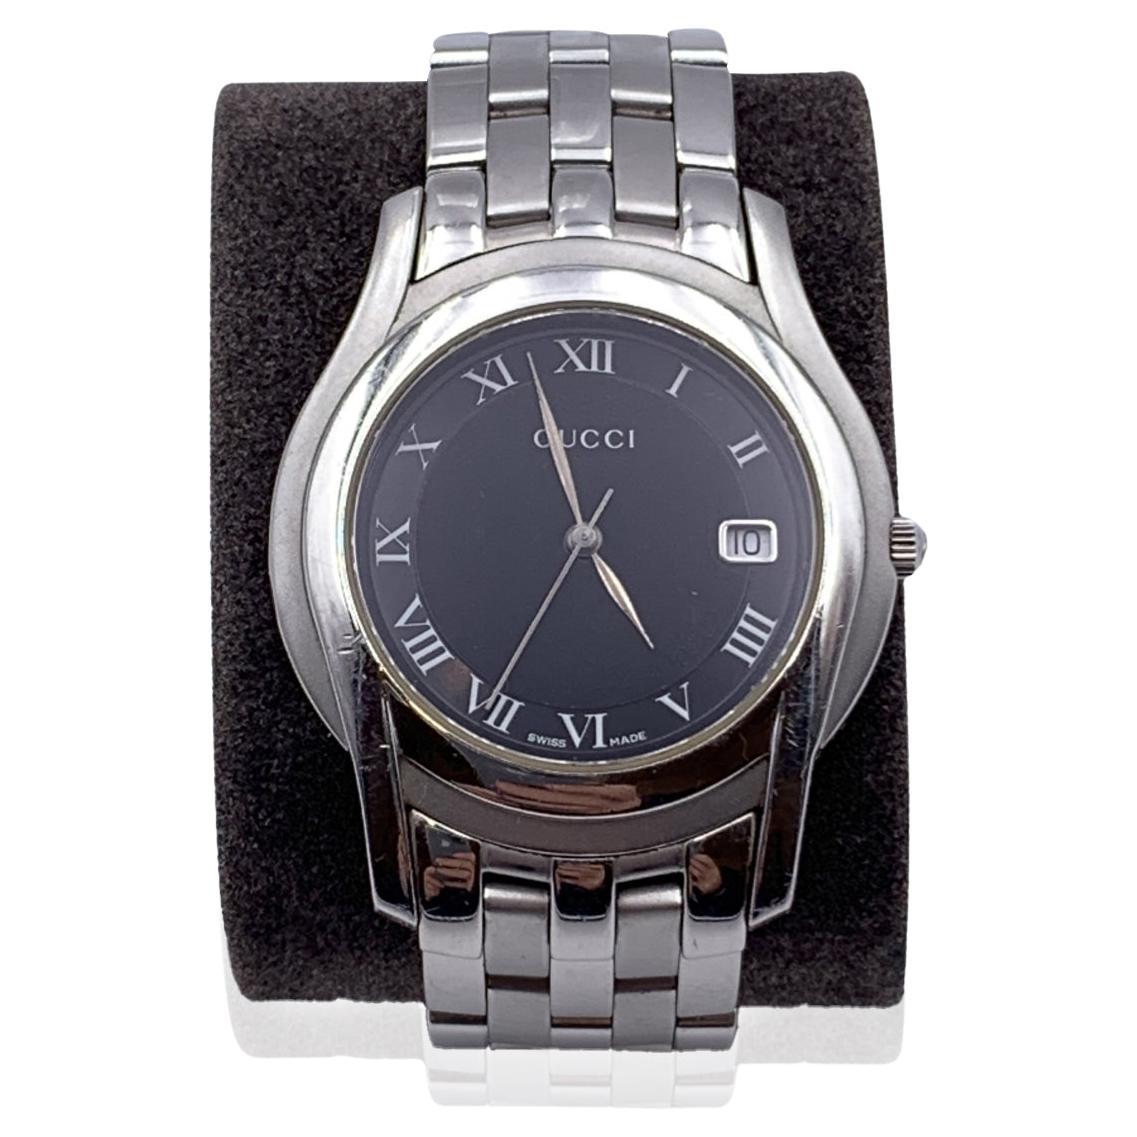 Gucci silver tone stainless steel wrist watch, mod. 5500 M. Black Dial. Date at 3 o' clock. Sapphire crystal. Swiss Made Quartz movement. Gucci written on face. Roman numbers. Gucci crest on the reverse of the case. Water Resistant to 3atm.